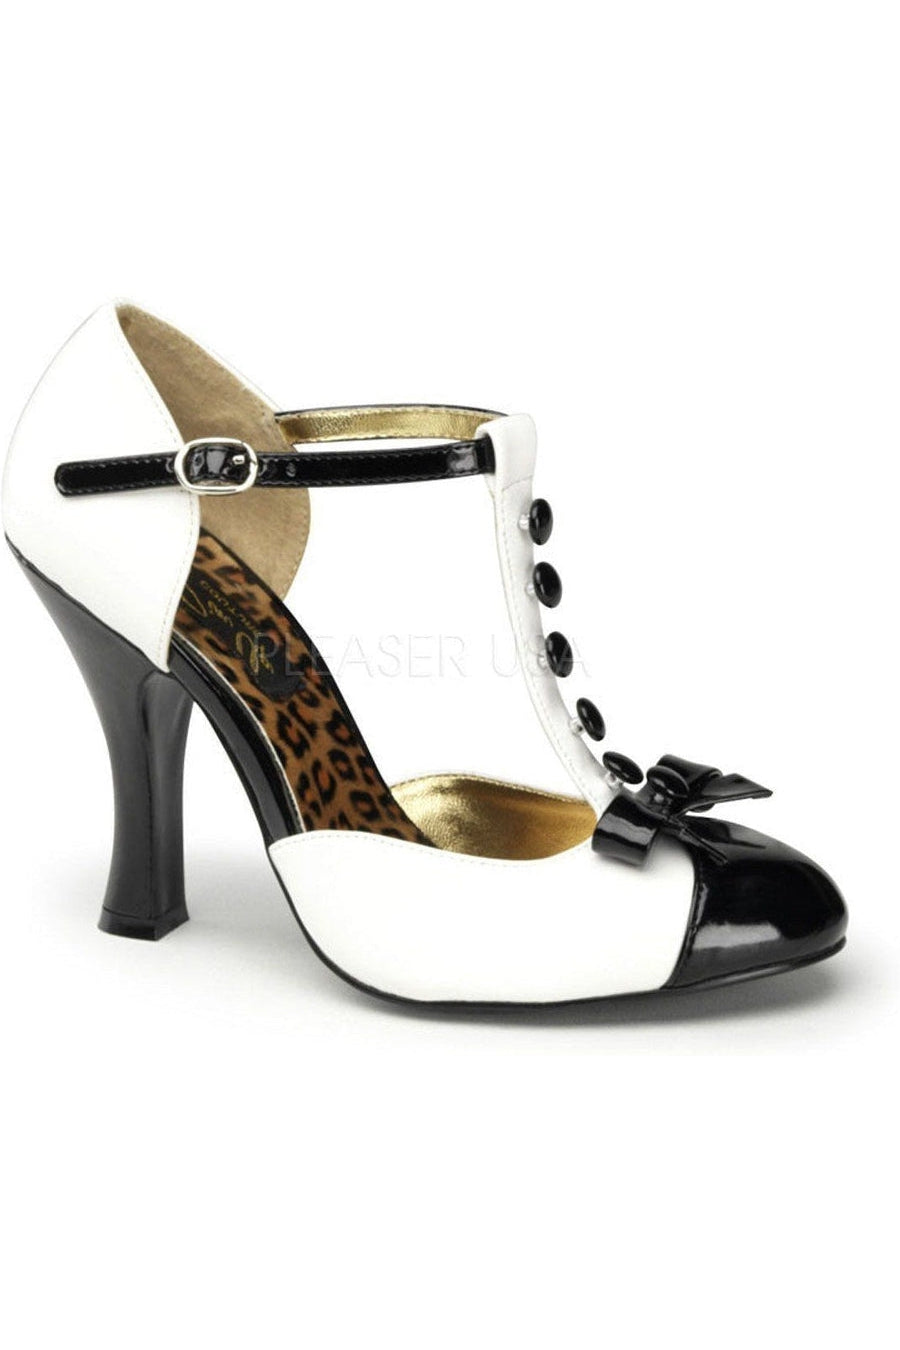 SMITTEN-10-Black-Pin Up Couture-Black-D'Orsays-SEXYSHOES.COM